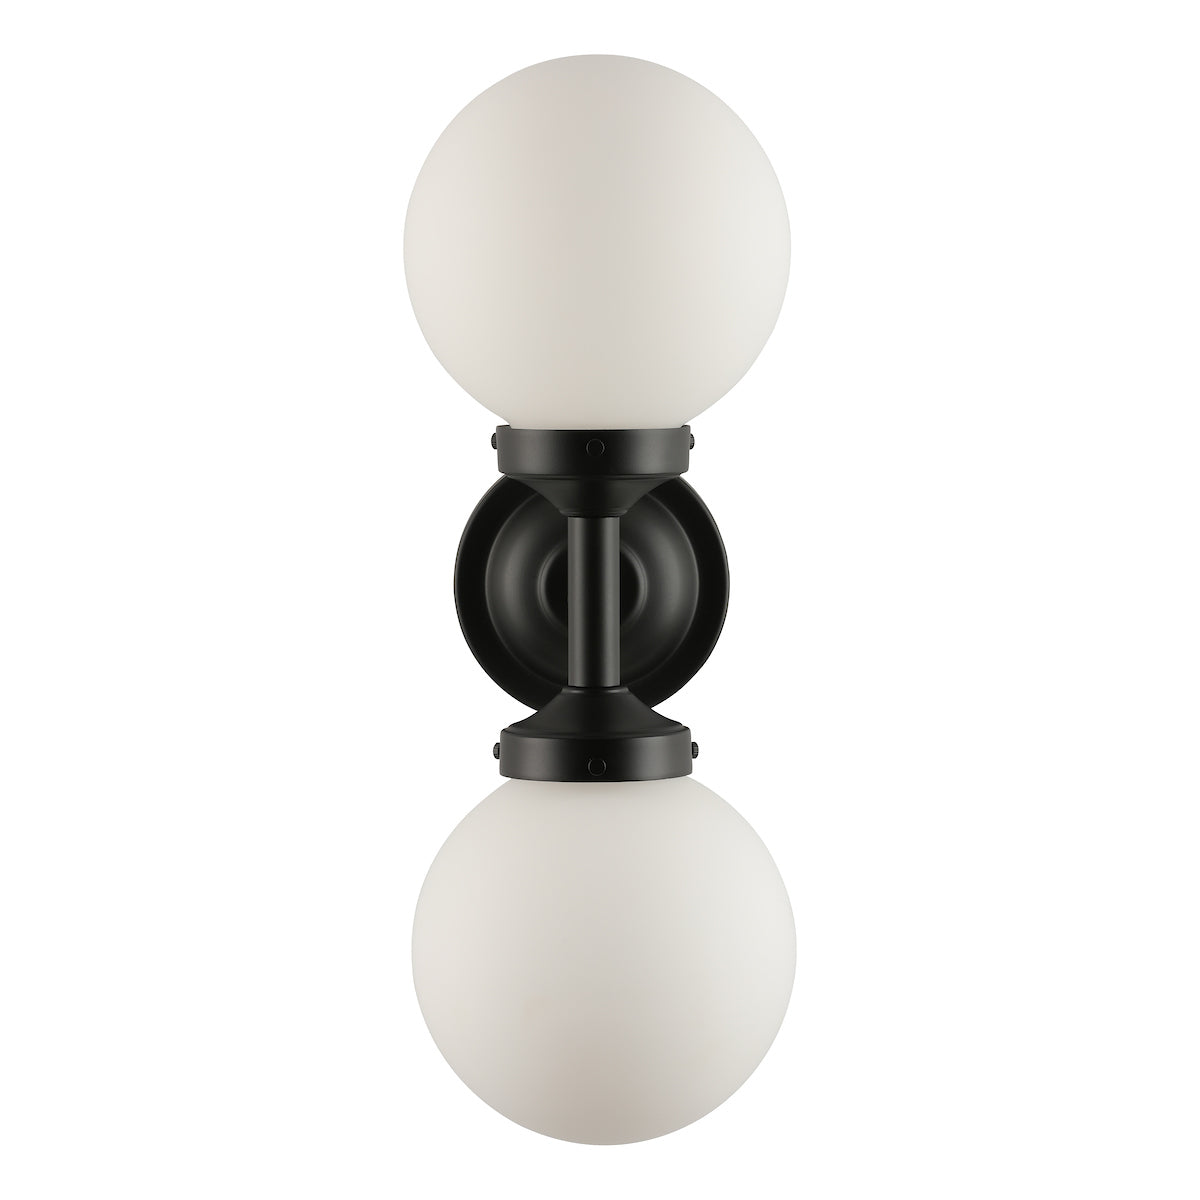 Buckley Double Wall Light, Black, IP44 Rated